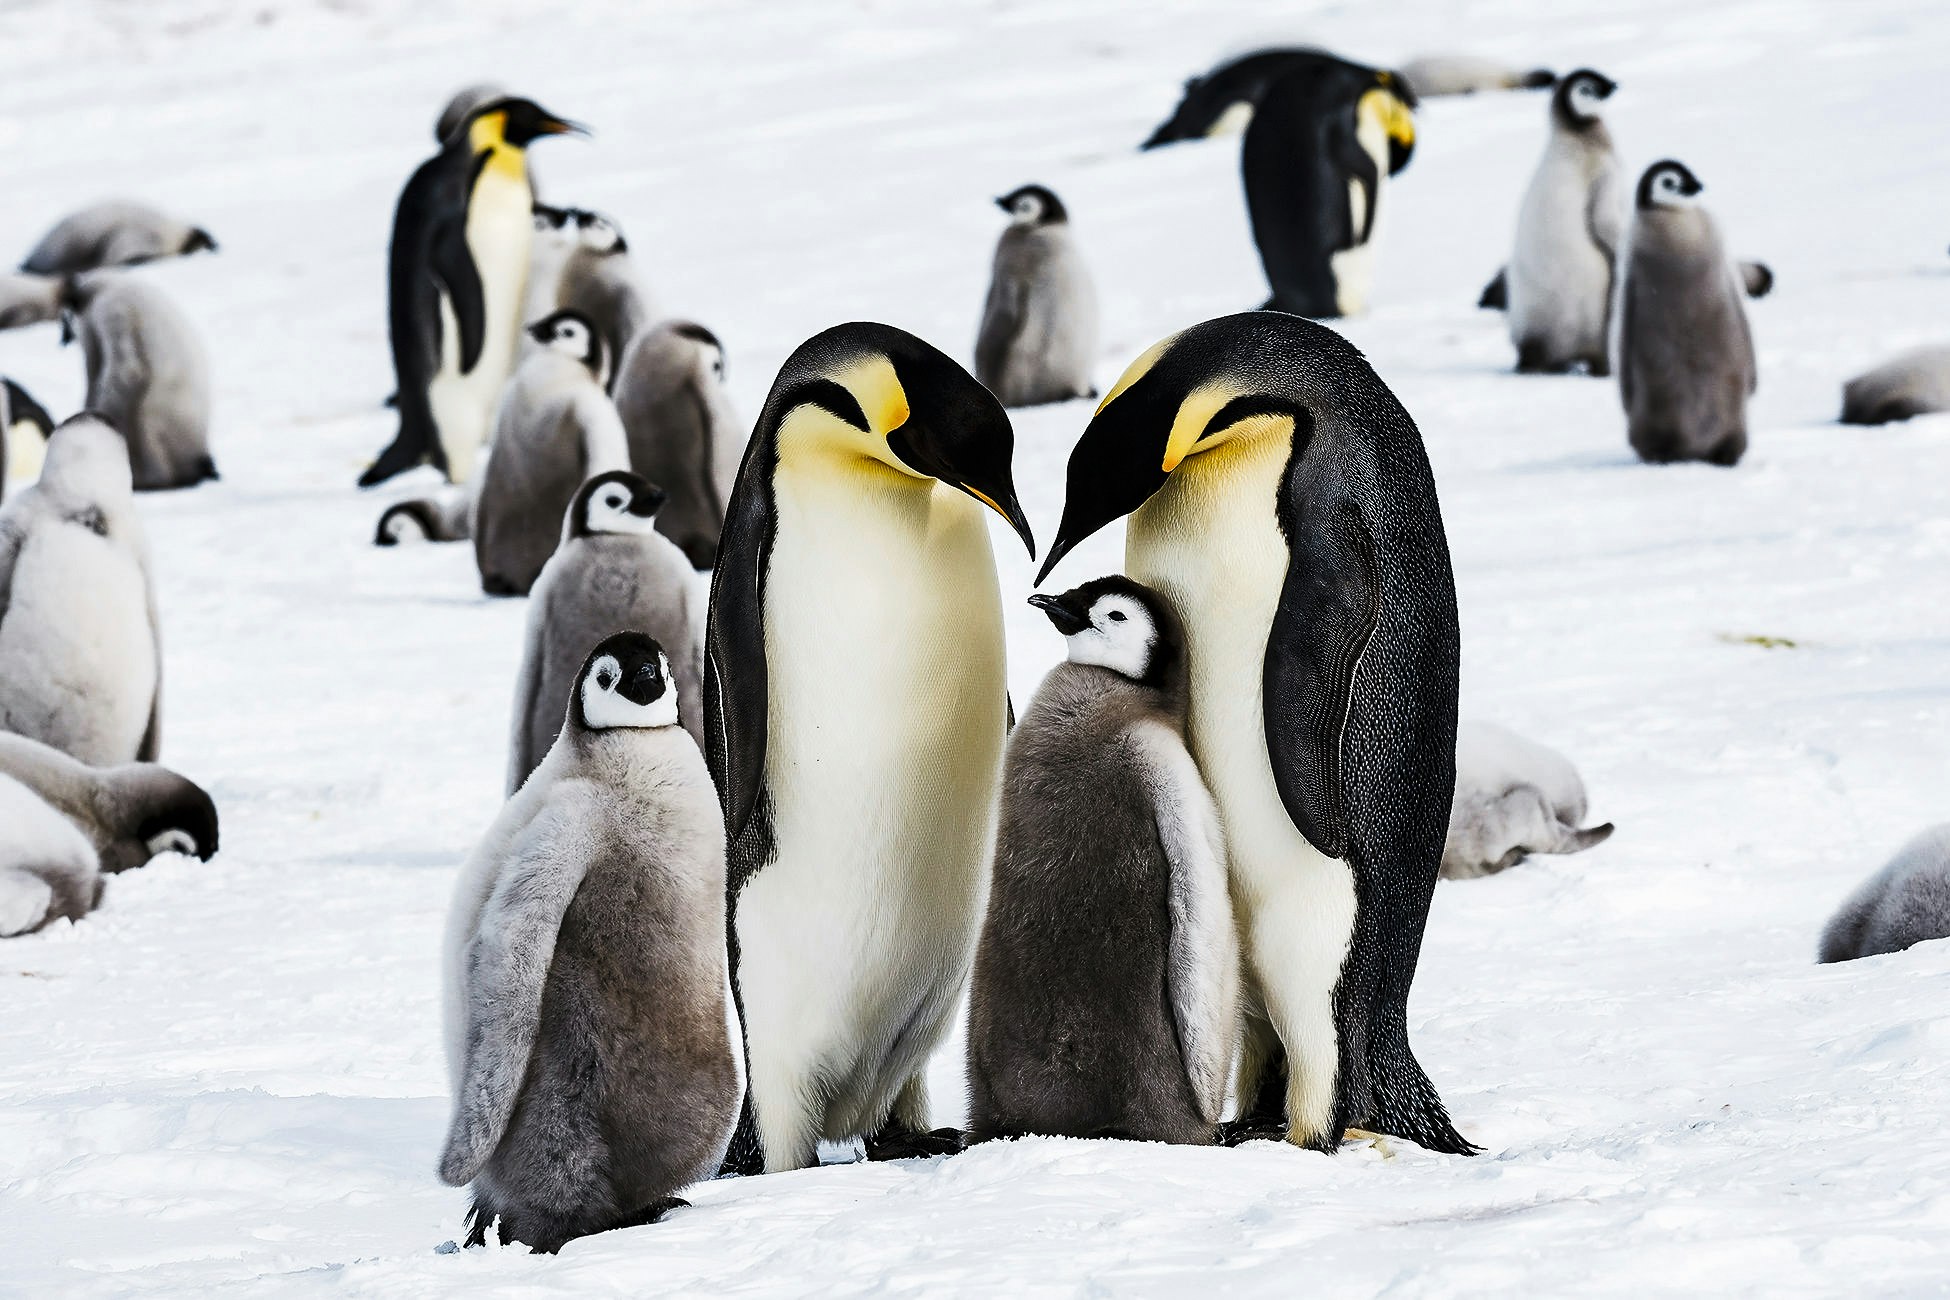 Visitors can enjoy activities such as penguin-spotting during the four-hour trip